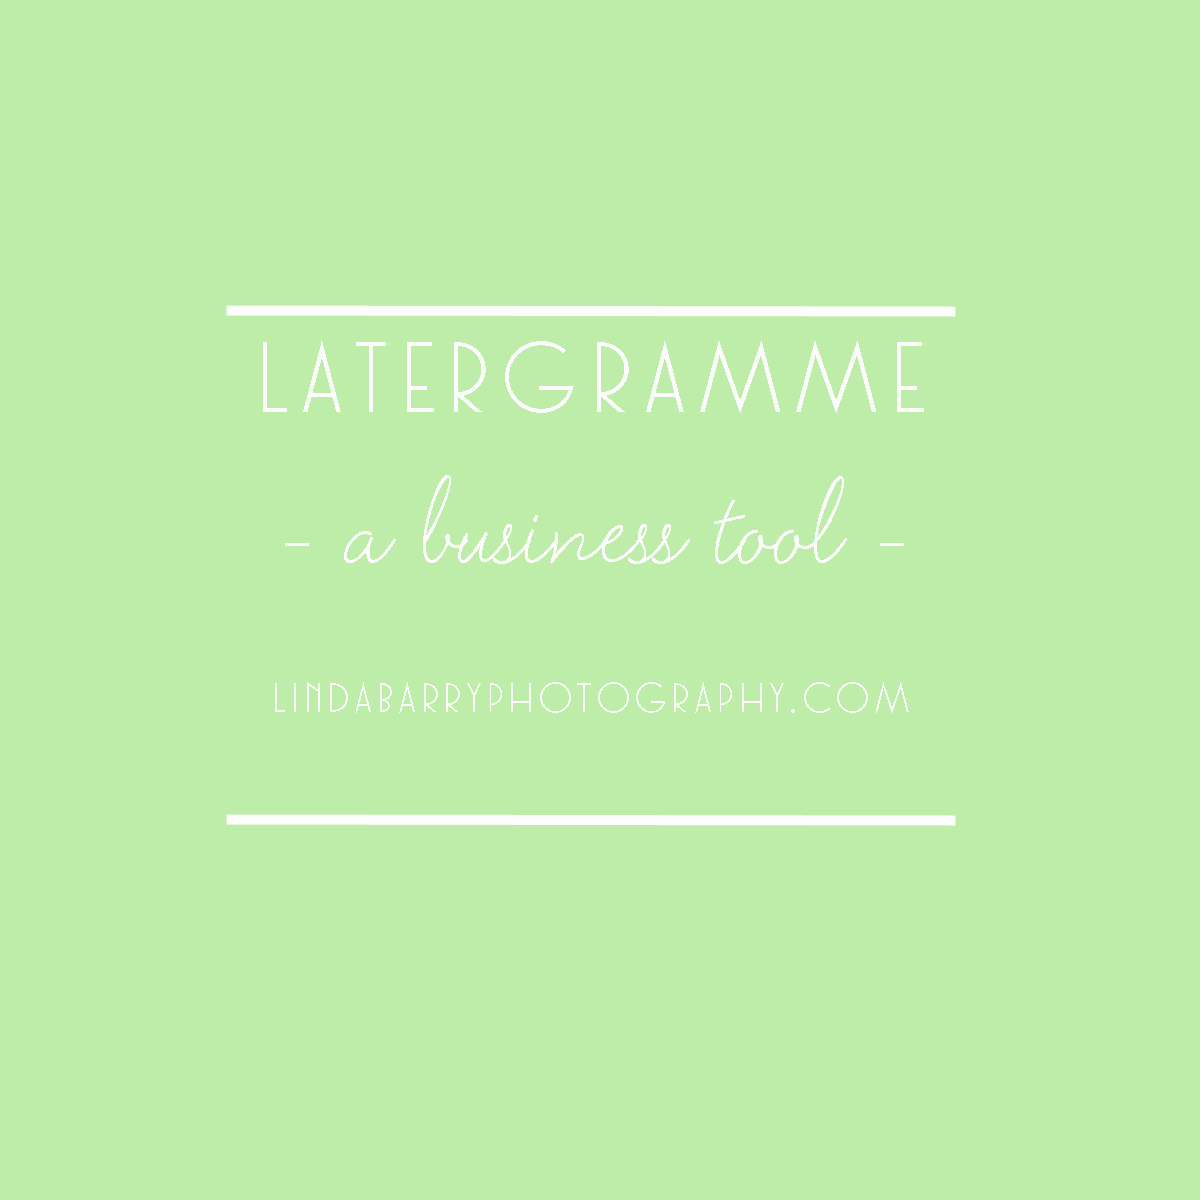 Latergramme guide for small business owners